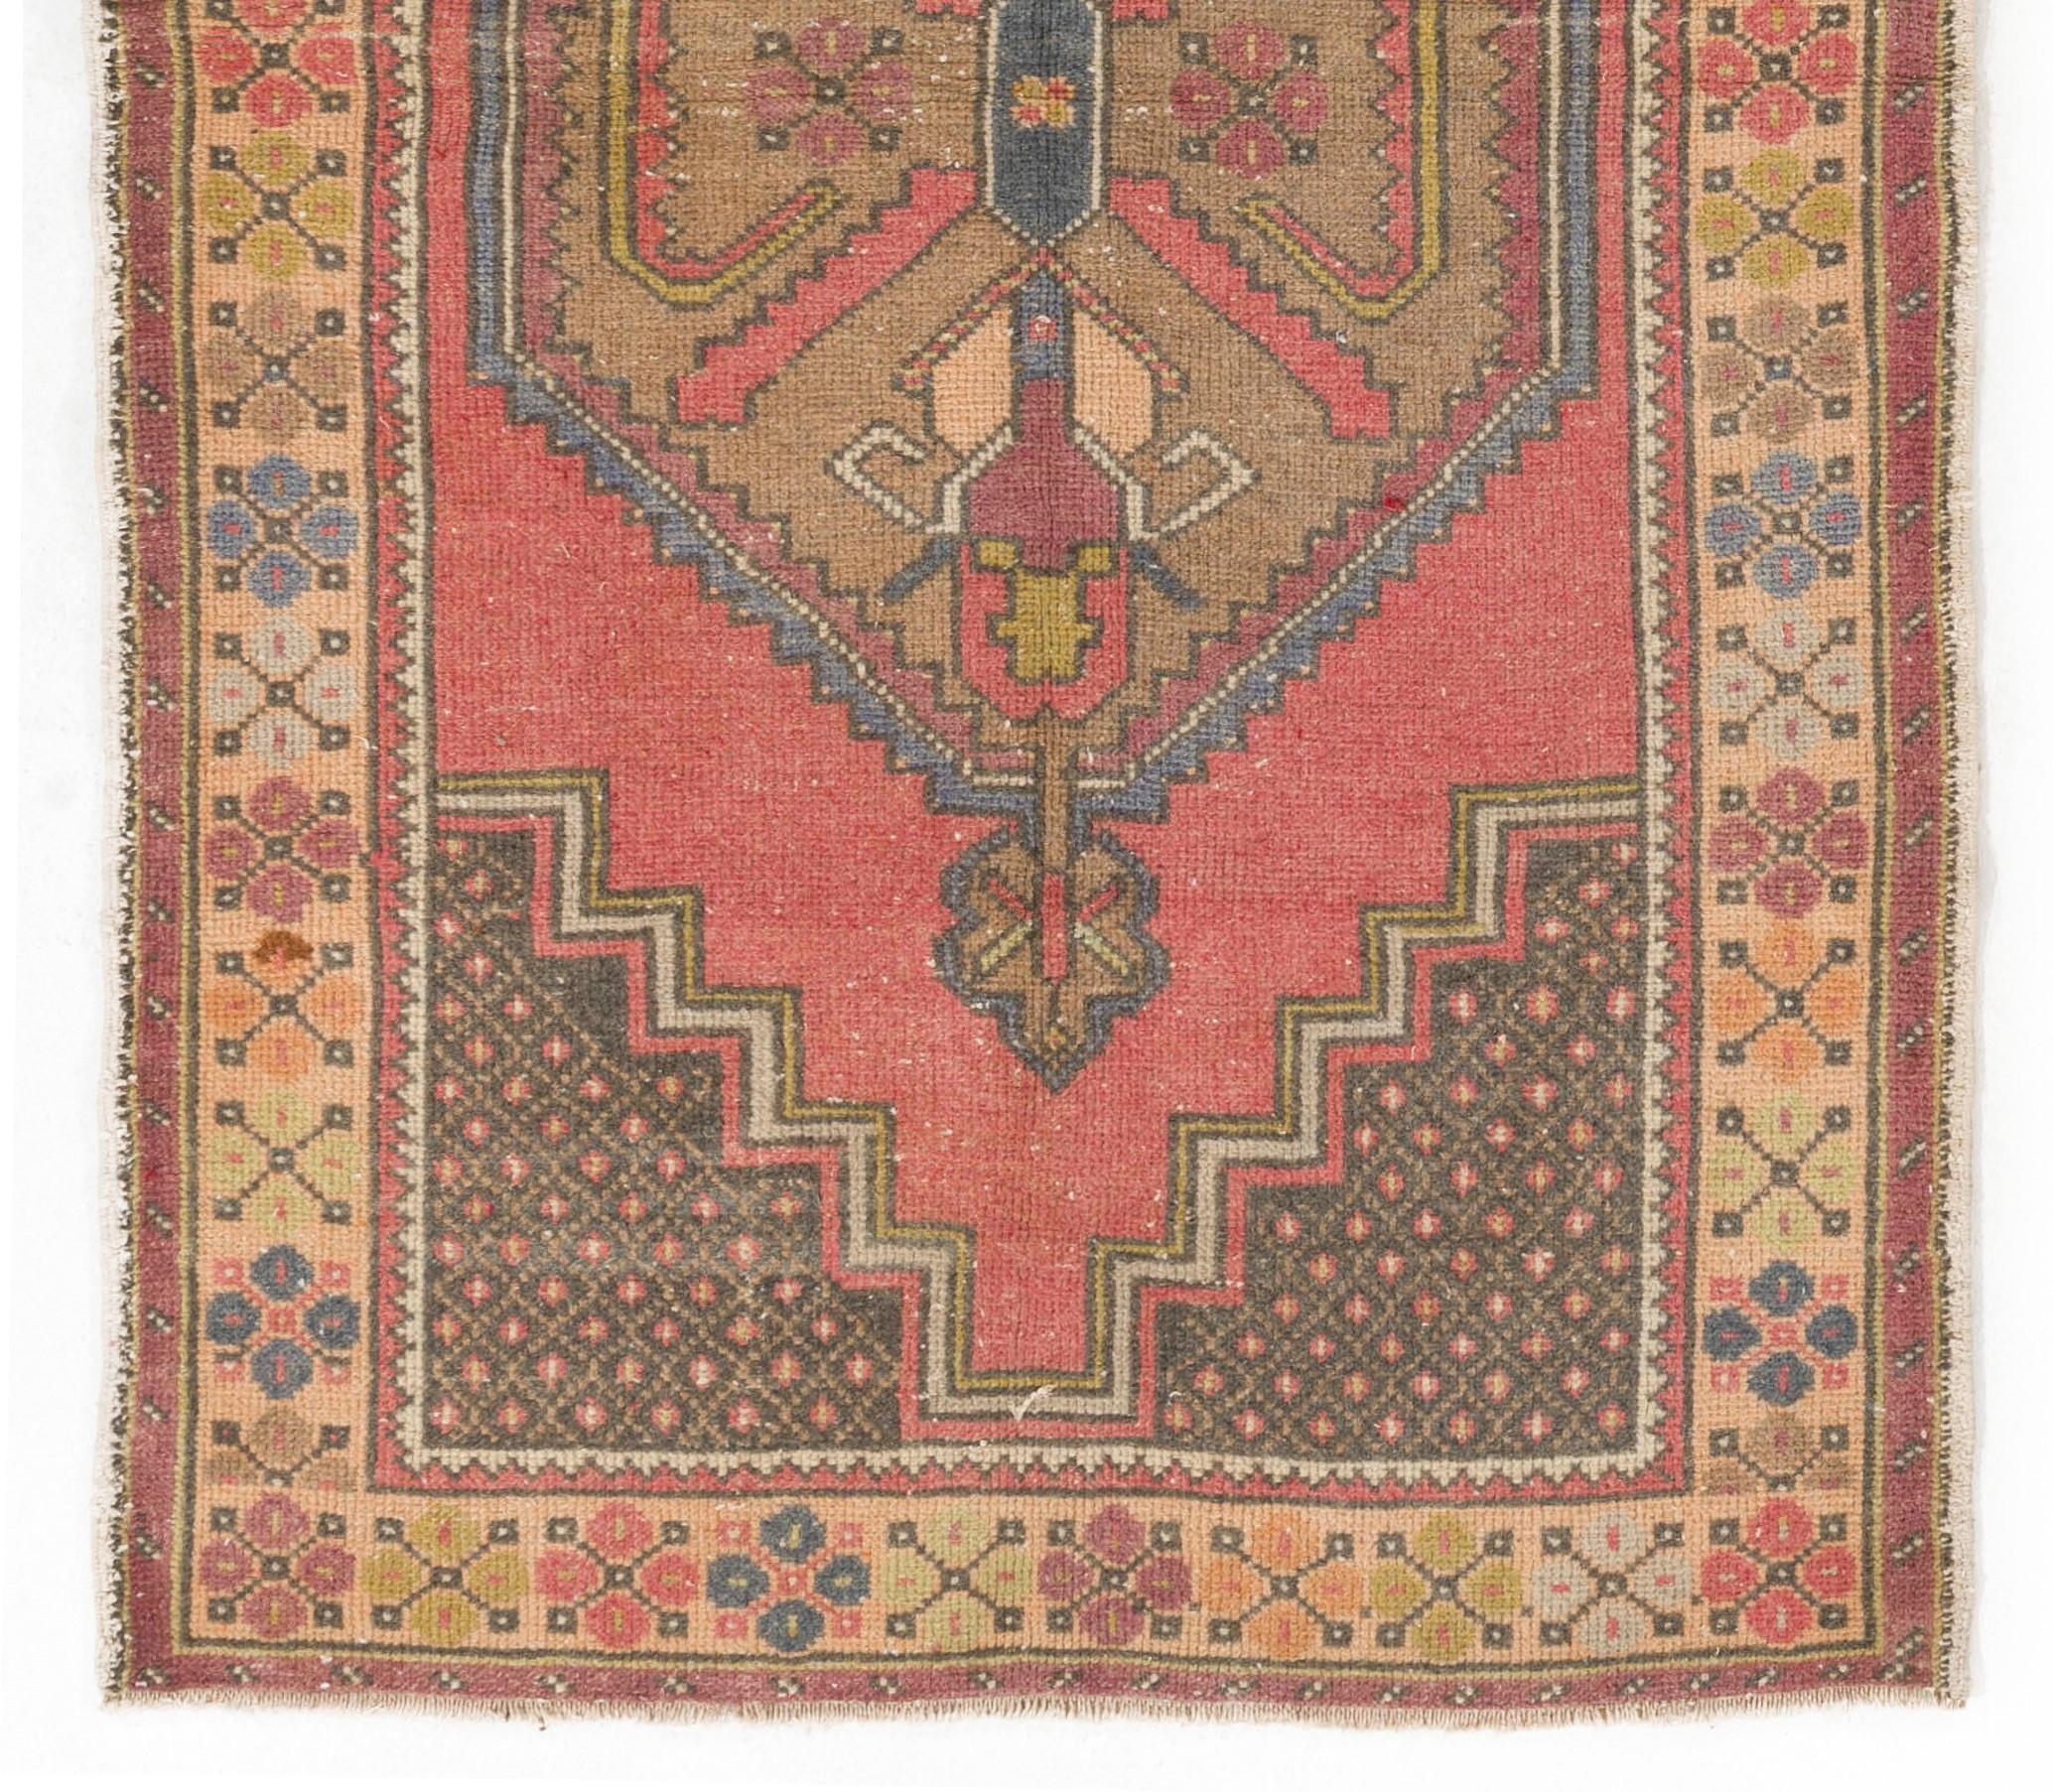 Tribal 3.8x6.7 Ft Vintage Handmade Turkish Accent Rug, Authentic 1950s Floor Covering For Sale